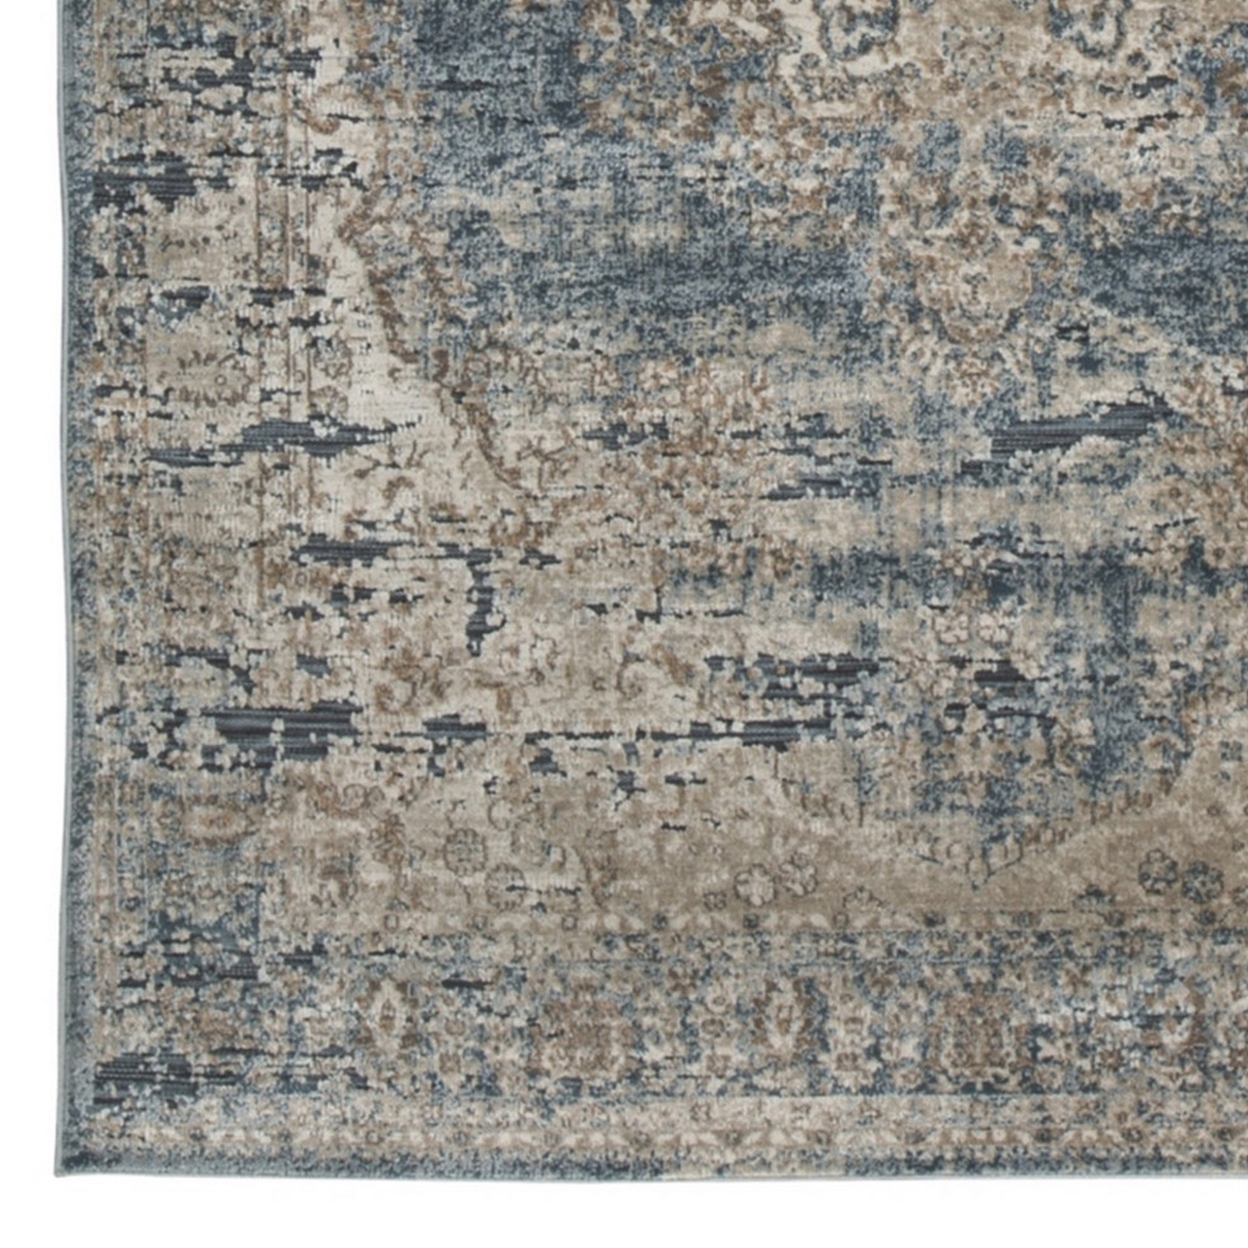 120 X 96 Inches Polypropylene Rug With Medallion Print, Blue And Beige- Saltoro Sherpi